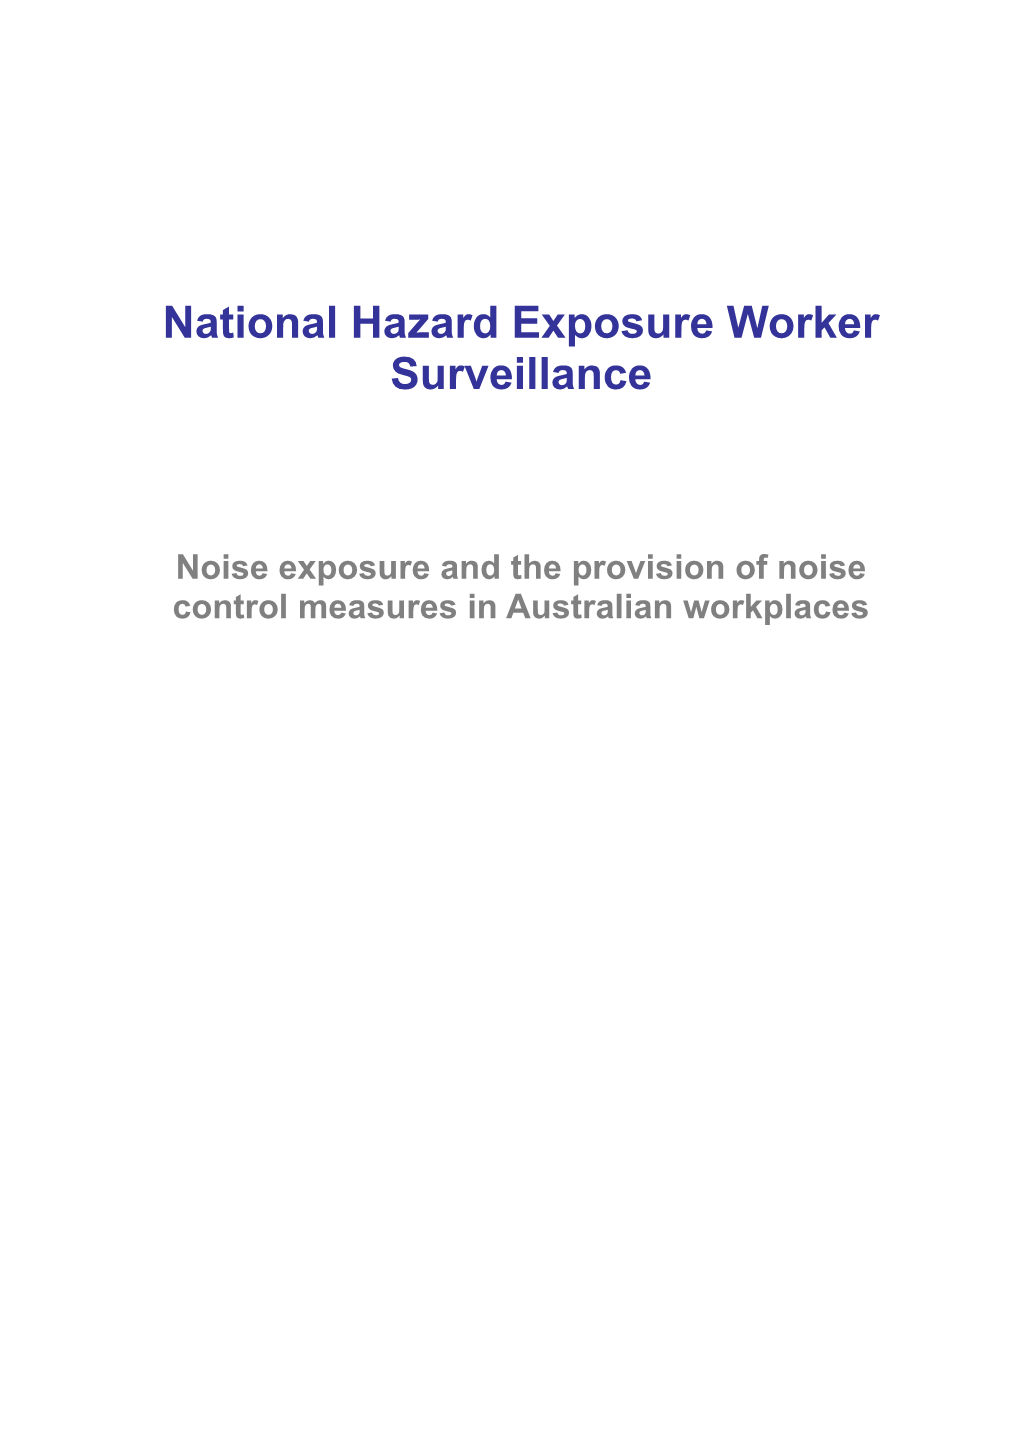 National Hazard Exposure Worker Surveillance Noise Exposure and the Provision of Noise